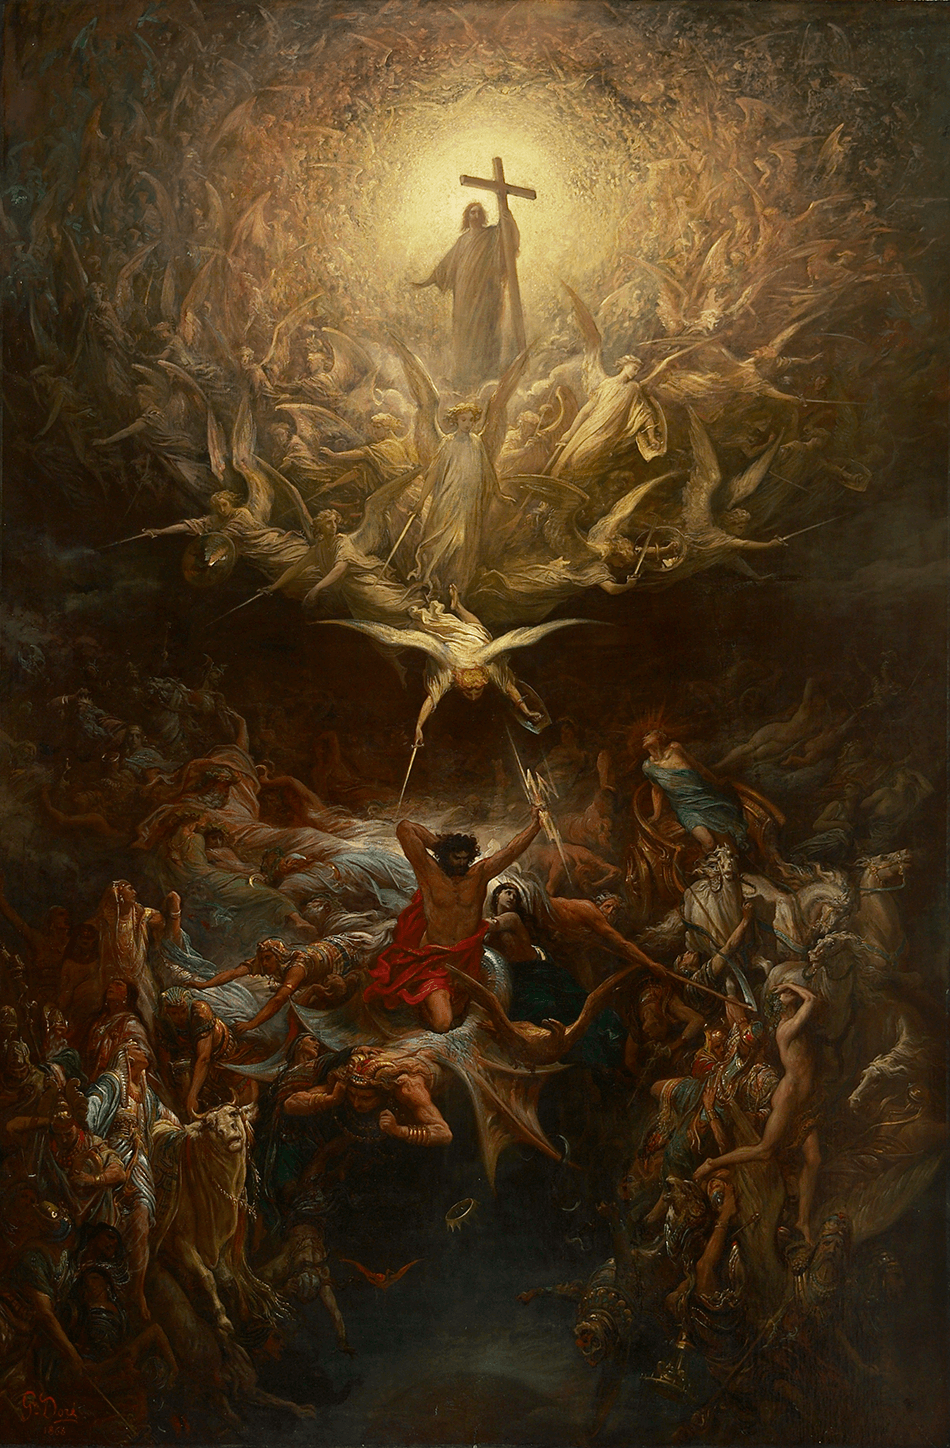 Gustave Doré (French 1832-1883), The Triumph of Christianity over Paganism 1868, oil on canvas. The Joey and Toby Tanenbaum Collection, 2002.